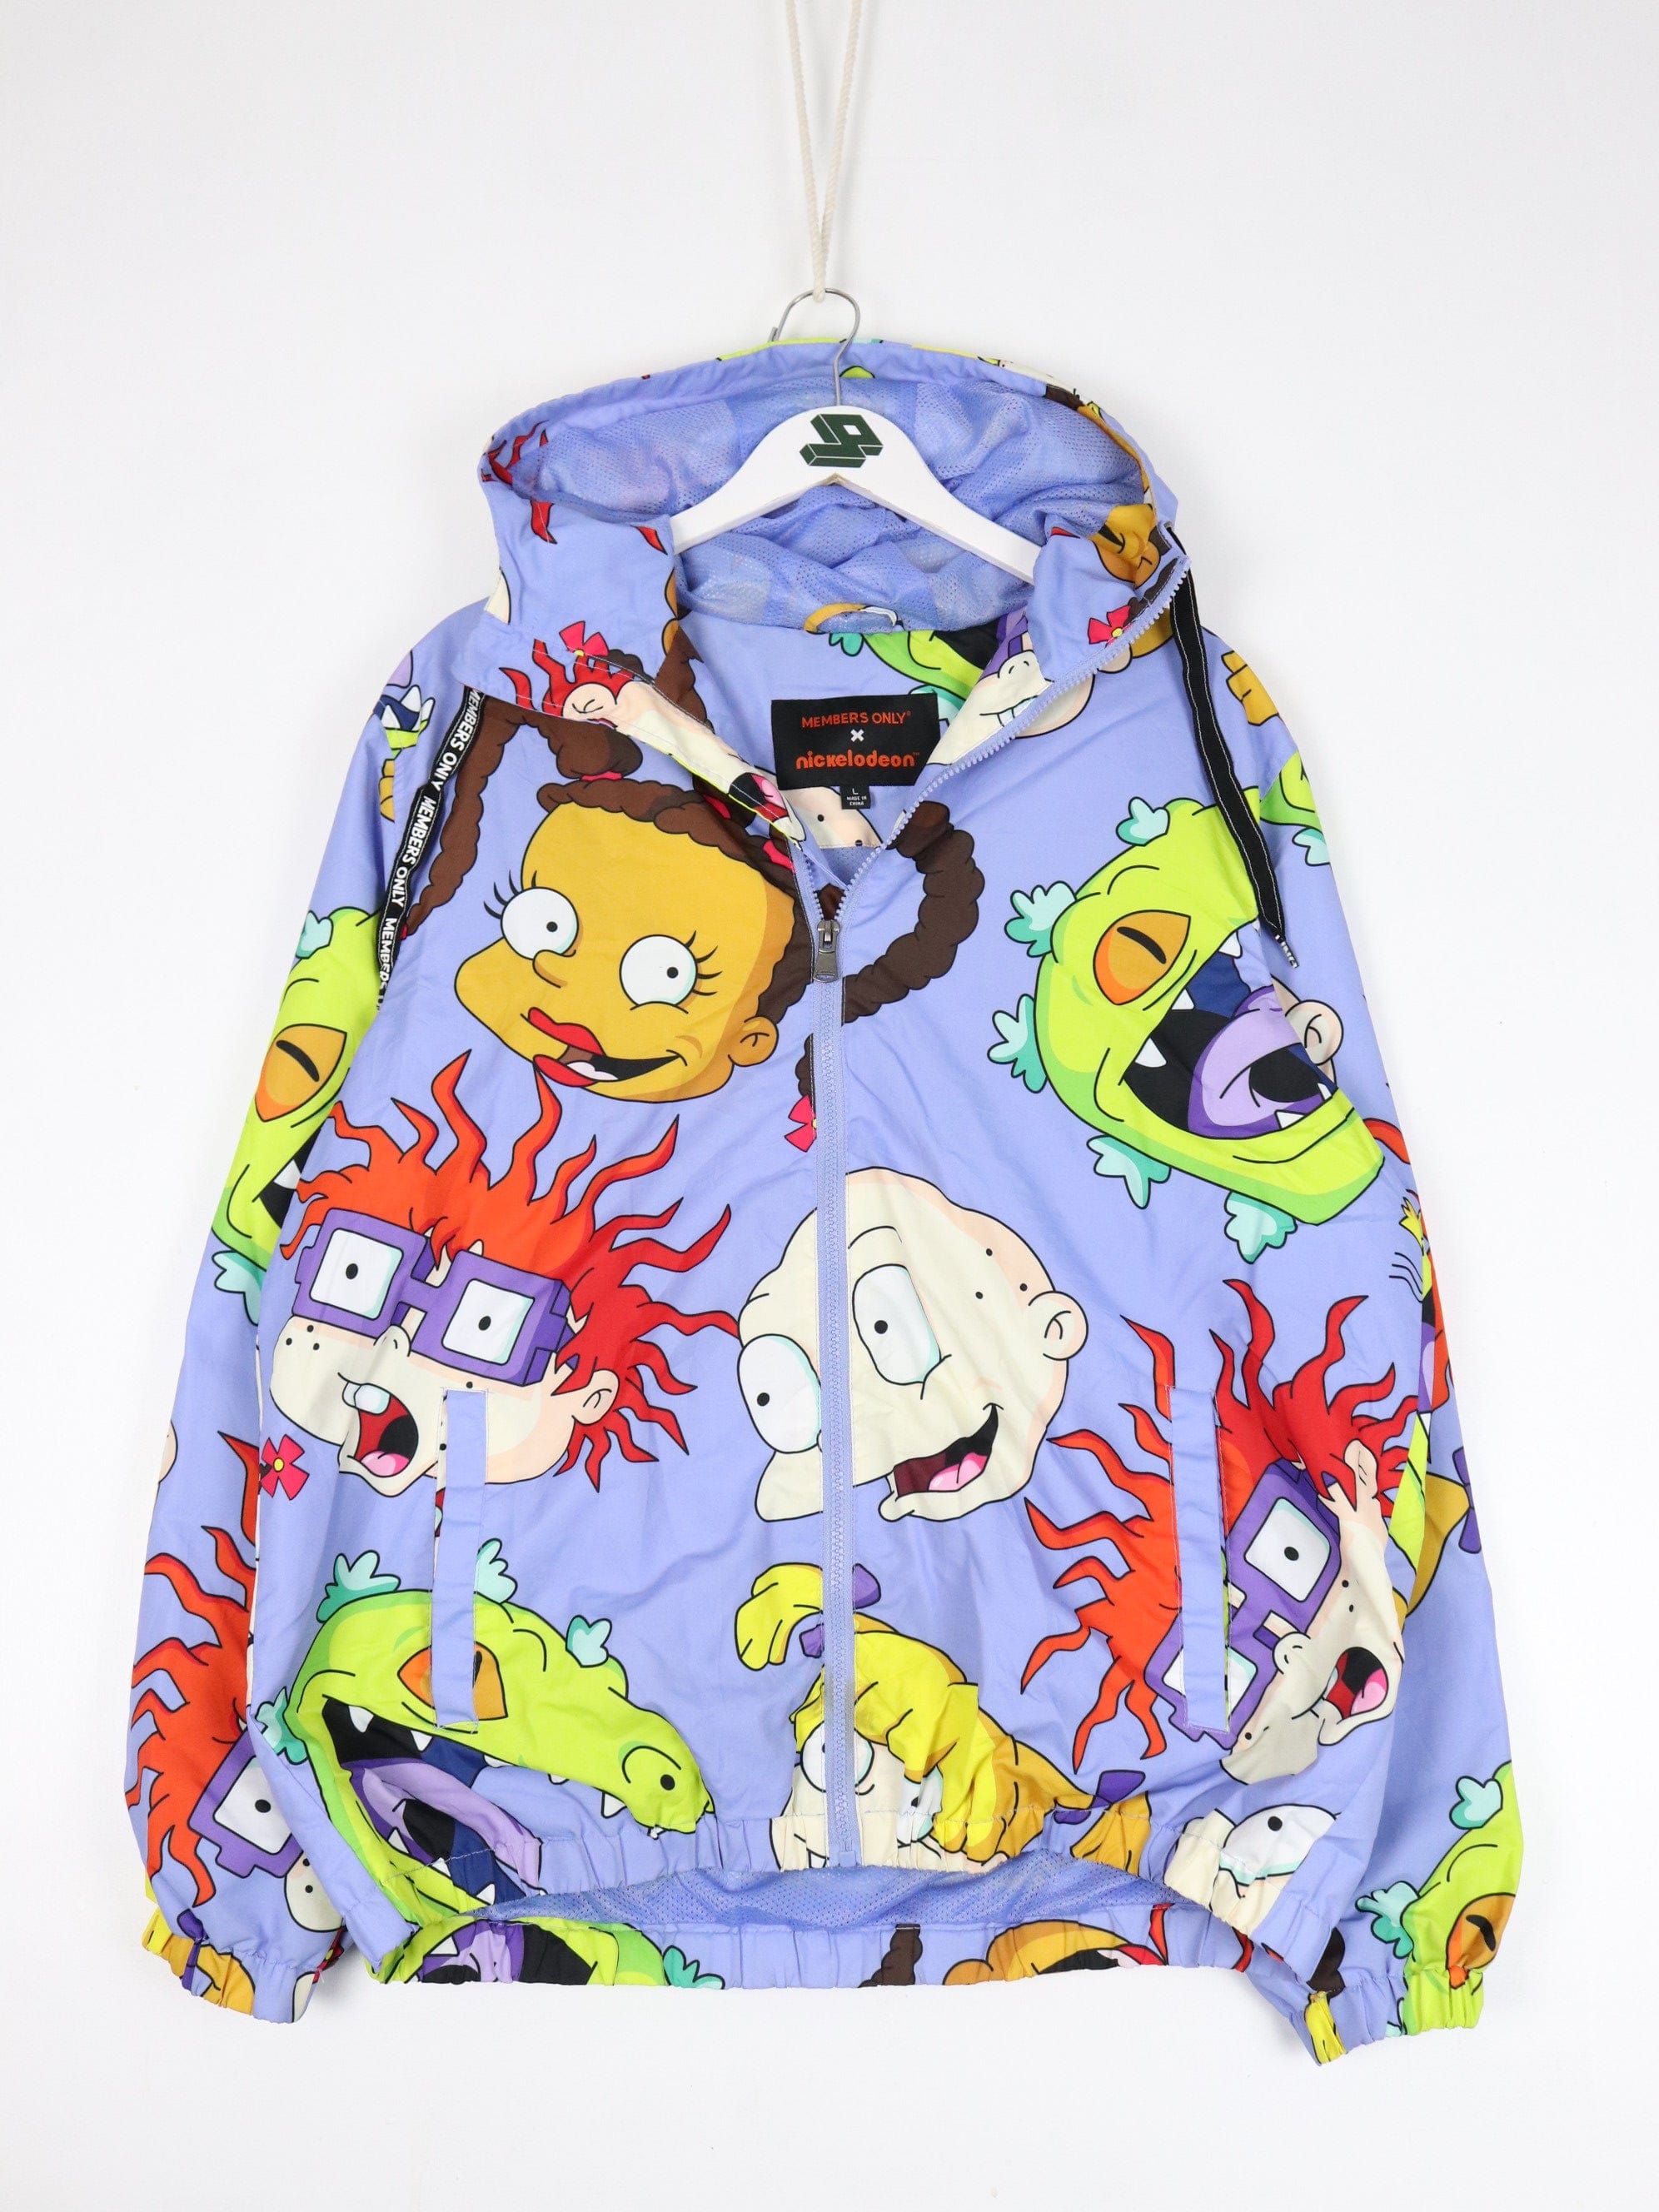 Members Only Nickelodeon Jacket Mens Large Blue Rugrats Cartoon All Over Print Lightweight